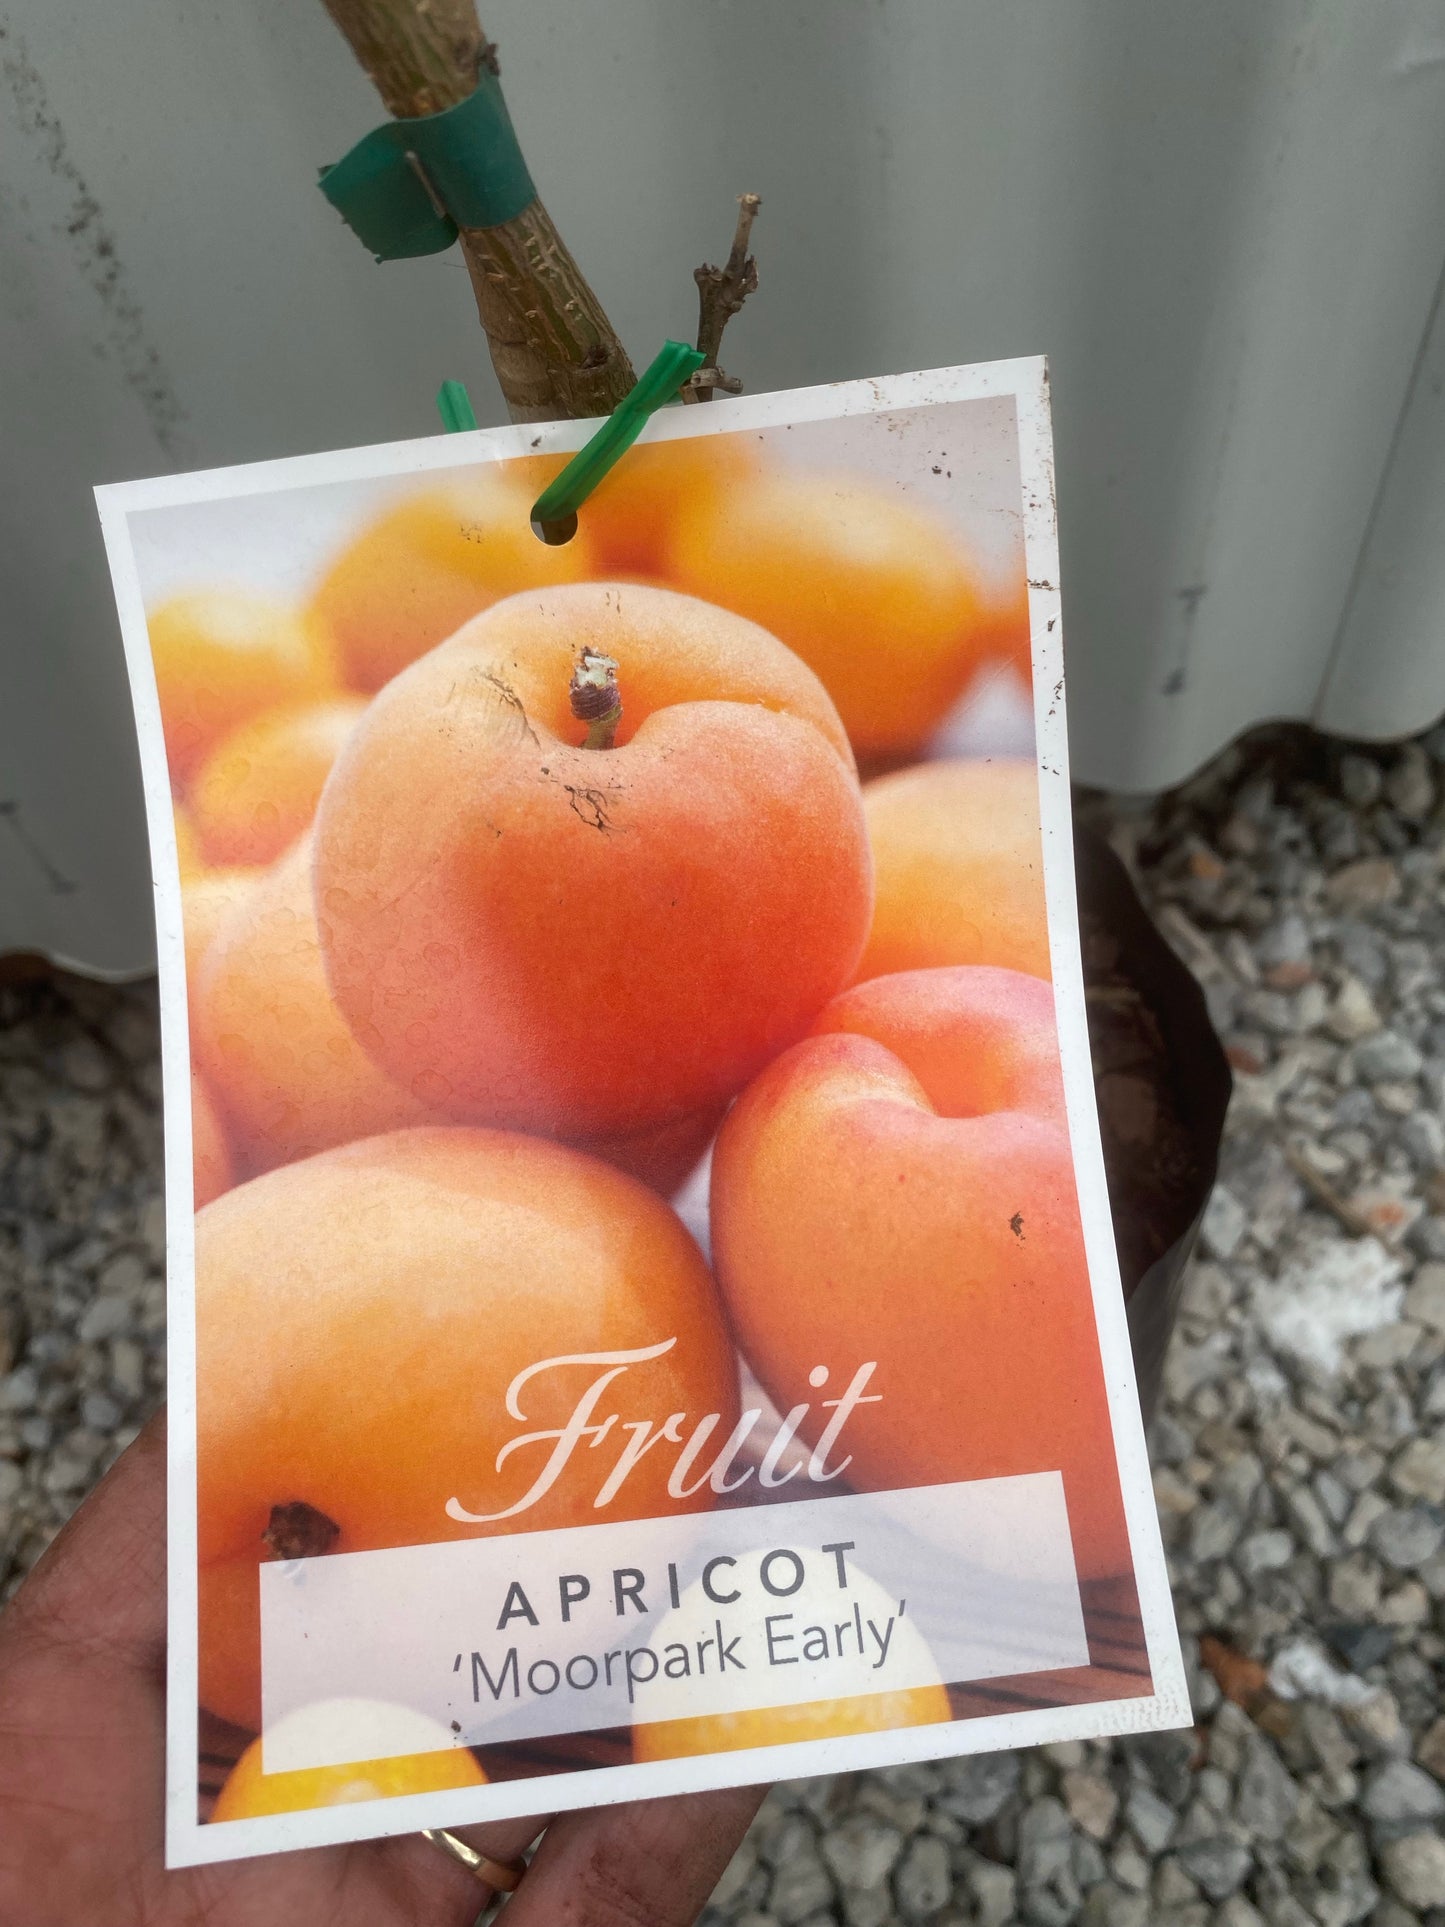 Apricot - Early Moorpark